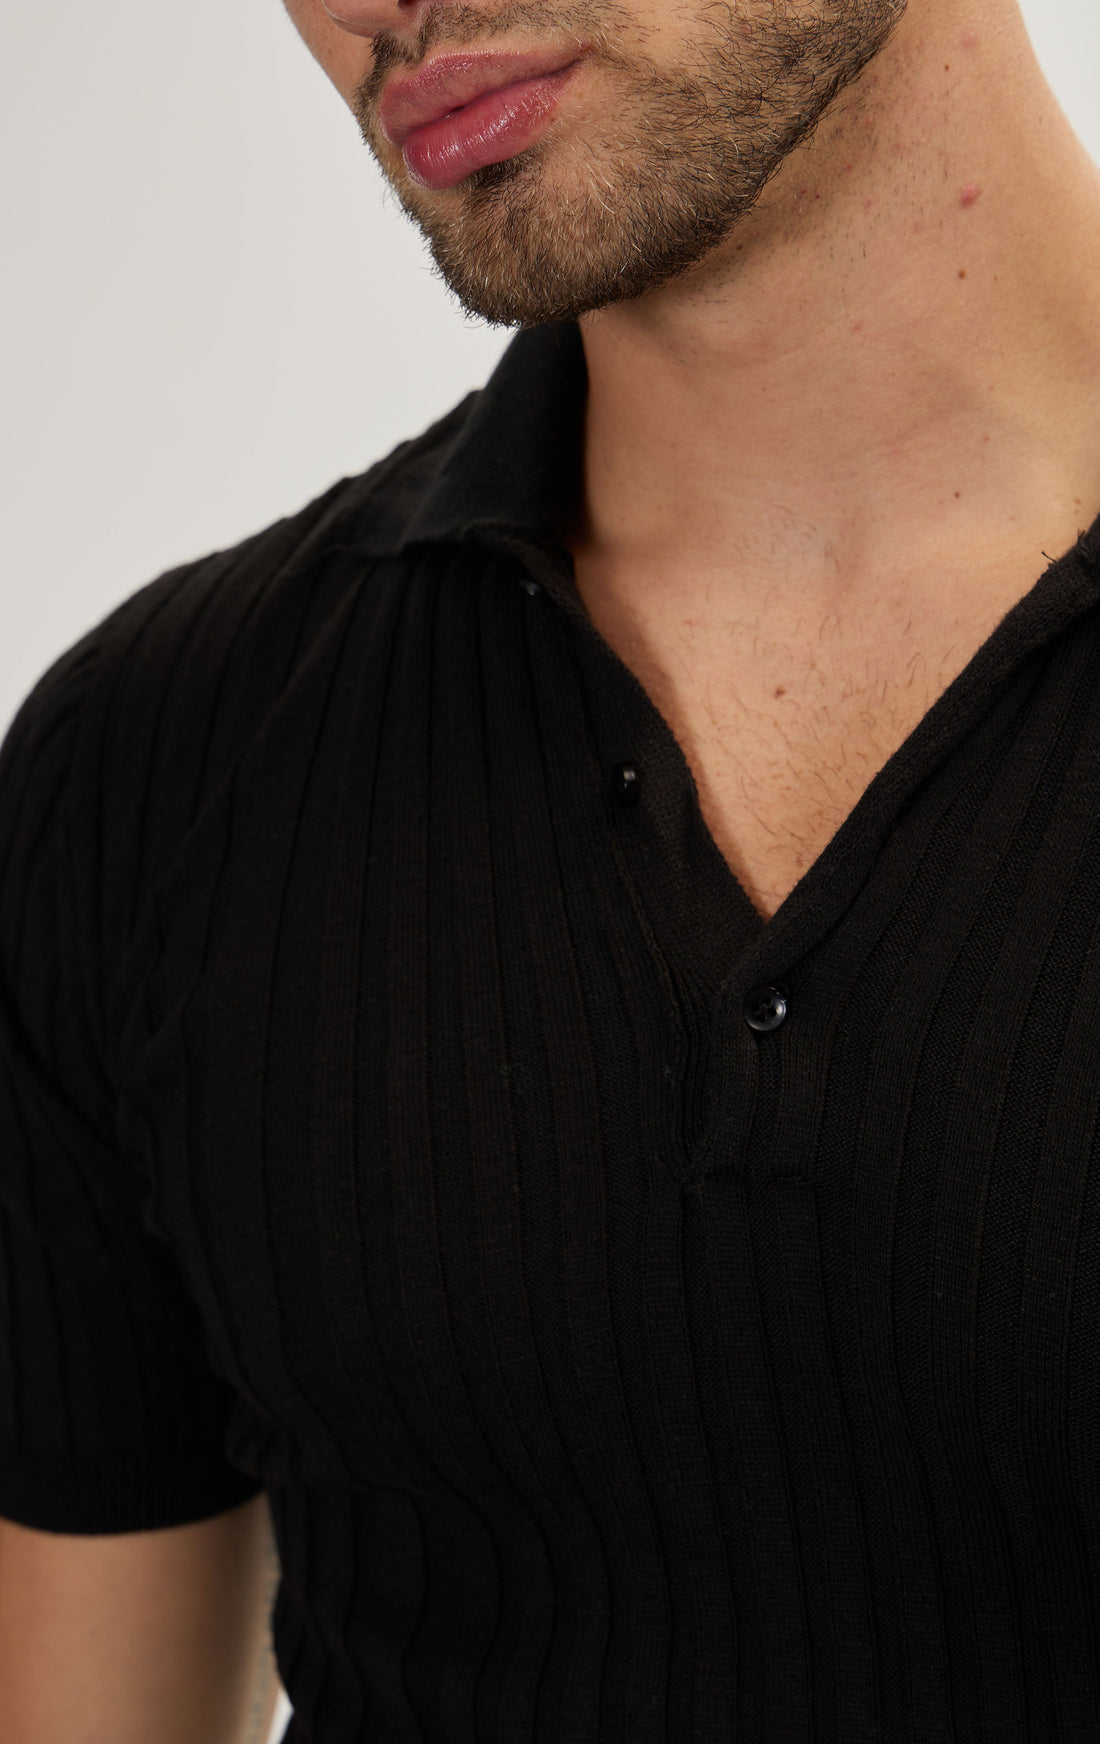 N° 6225 RIBBED S/S POLO - BLACK